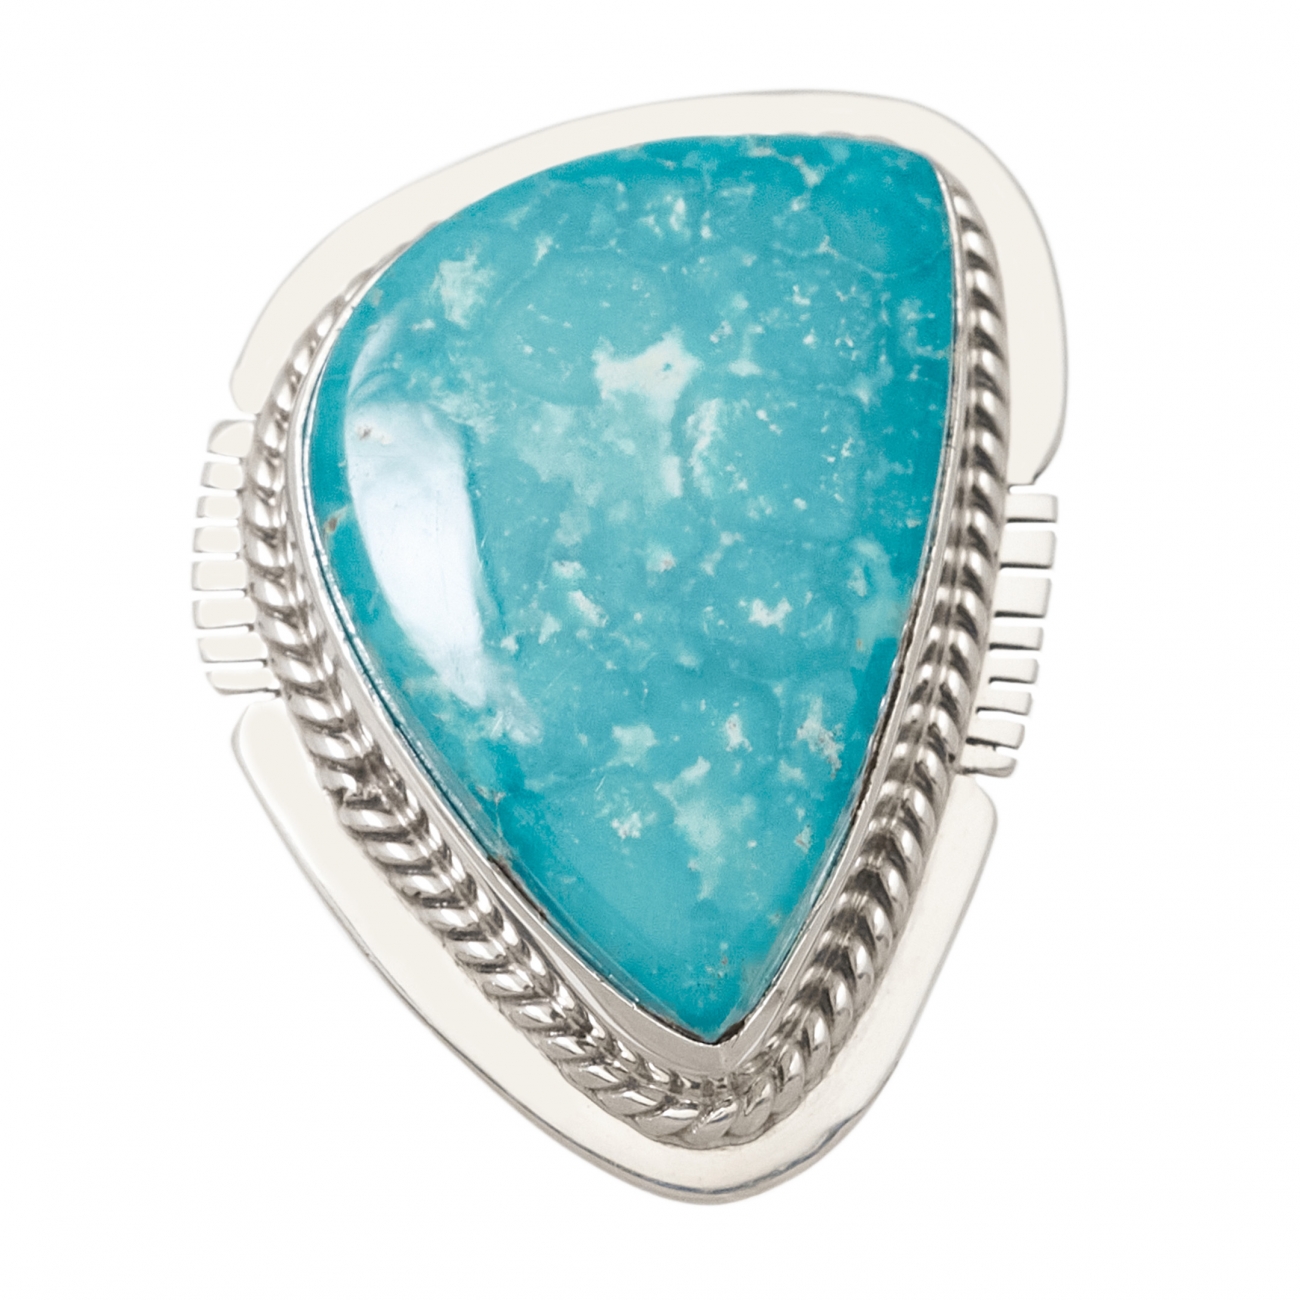 Navajo ring for women BA1242 in turquoise and sterling silver - Harpo Paris